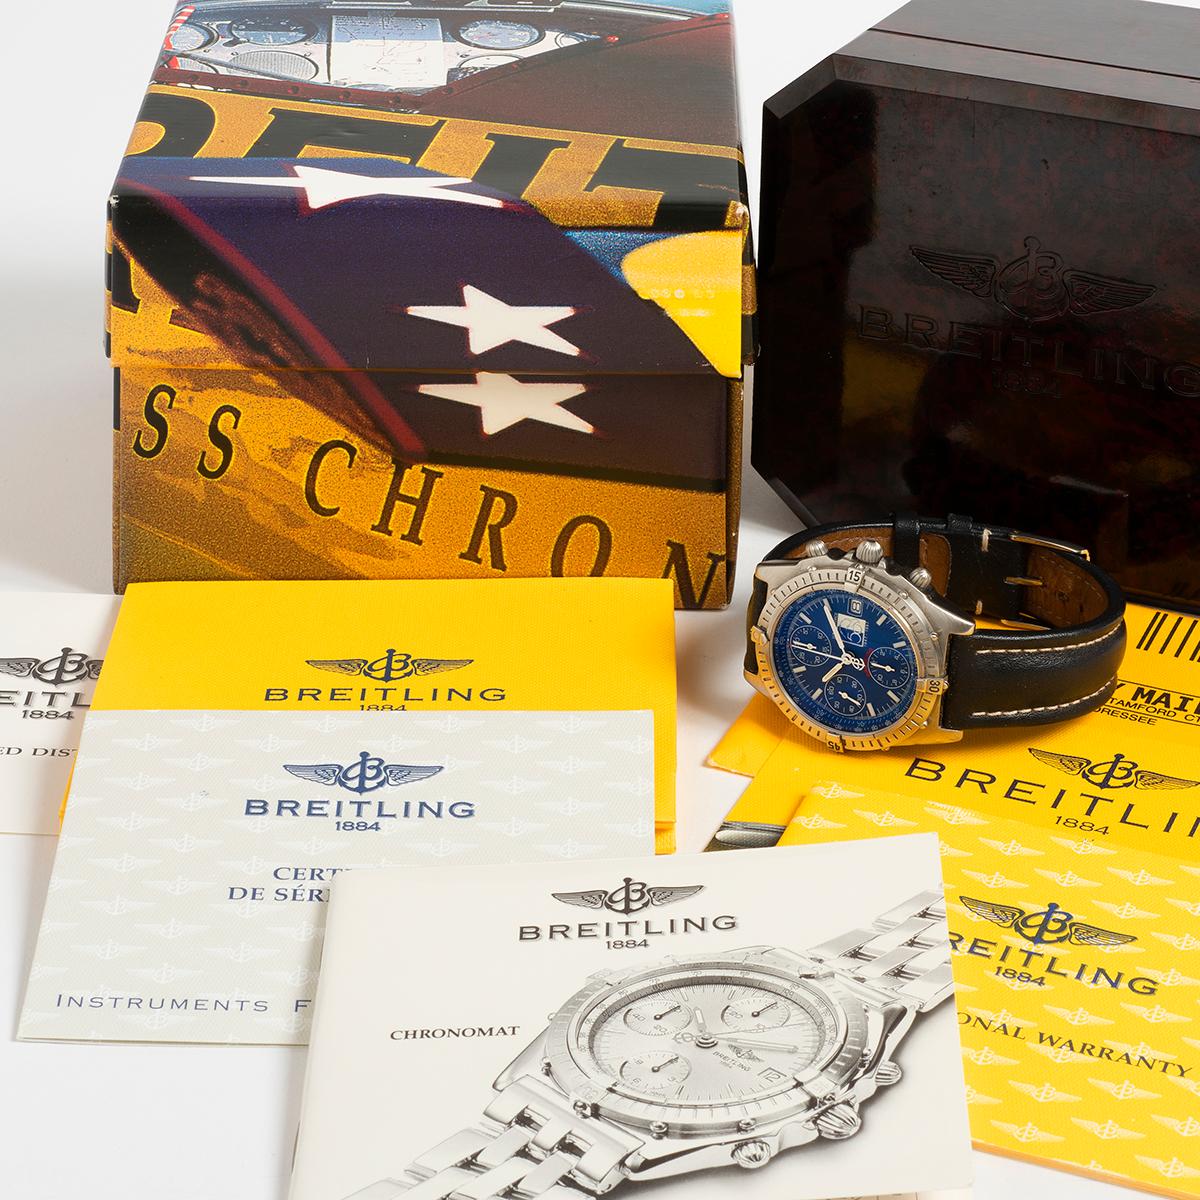 A limited edition, of just 500 pieces , this Breitling Chronomat with special blue dial was produced to celebrate 50 years of the US Air Force. Presented in excellent condition with light signs of use to the stainless steel 40mm case and original